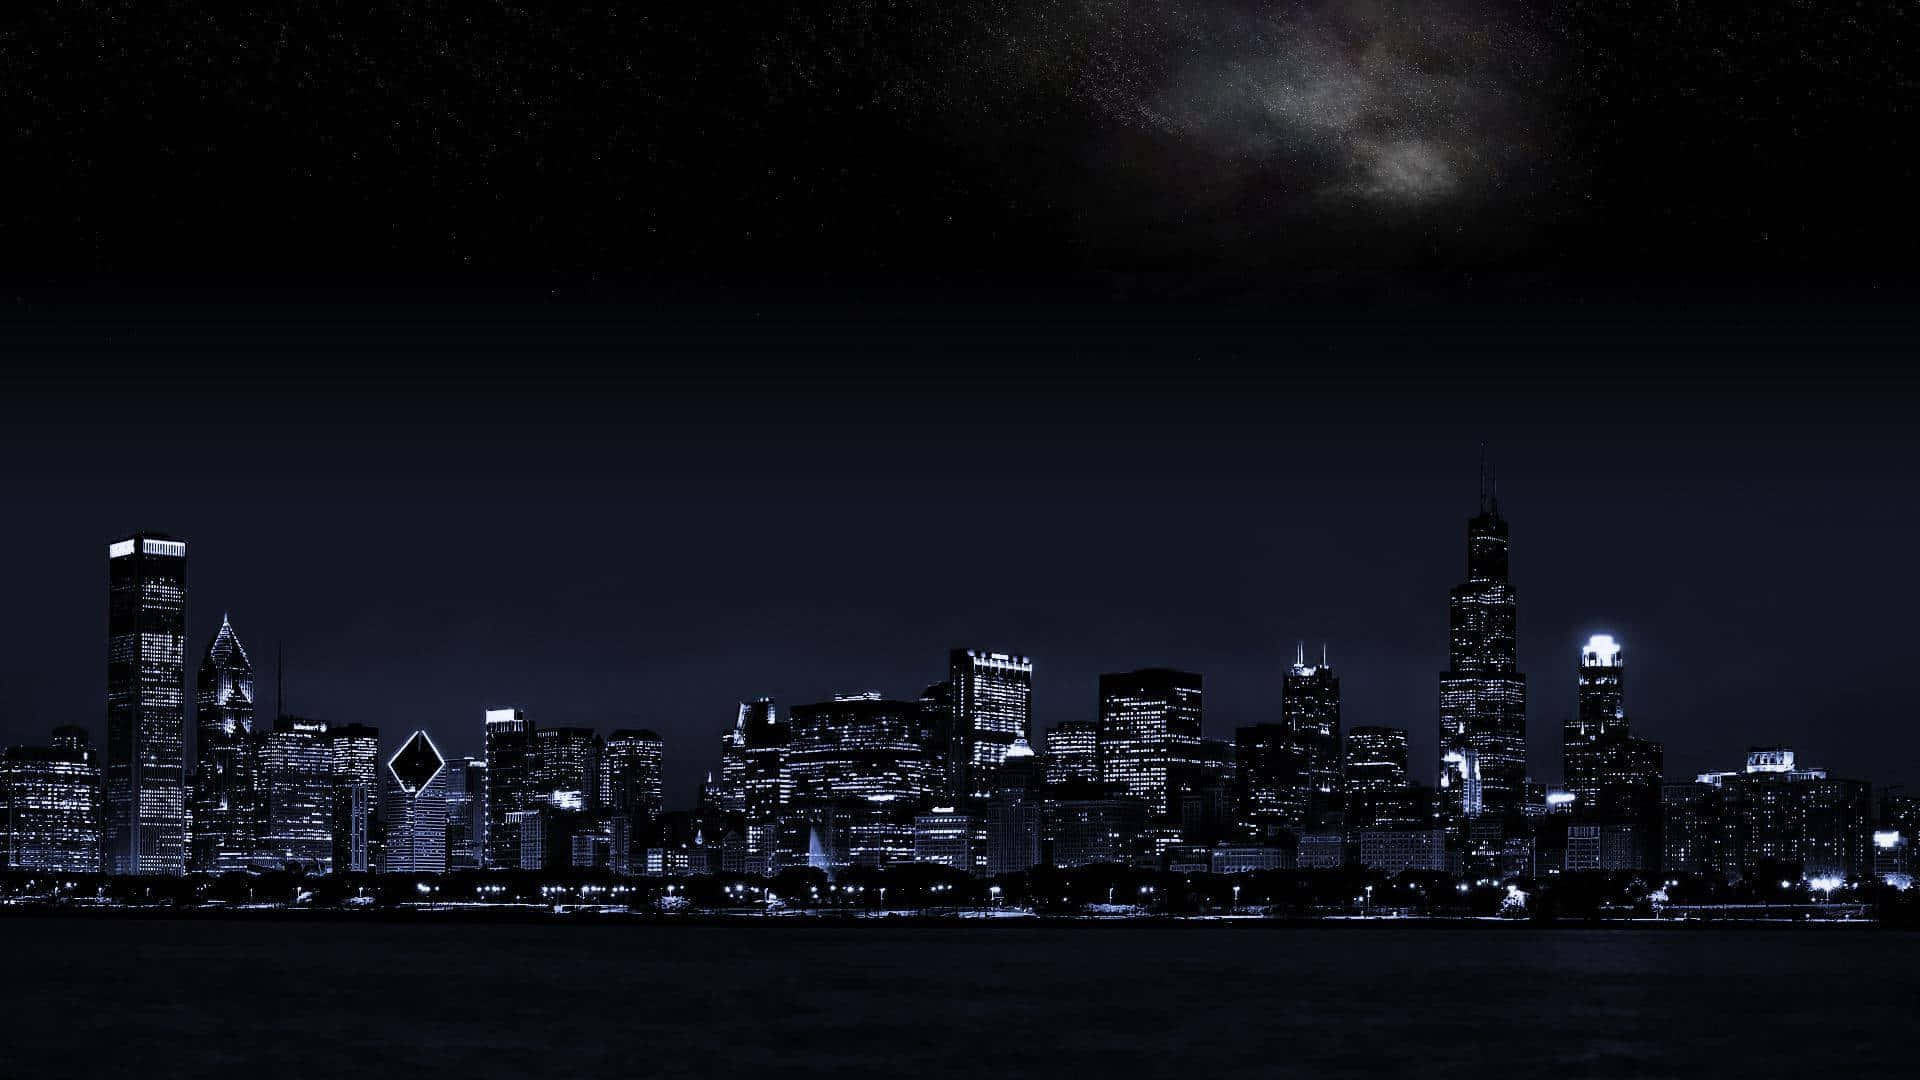 "The breathtaking sight of the twinkling night city skyline."